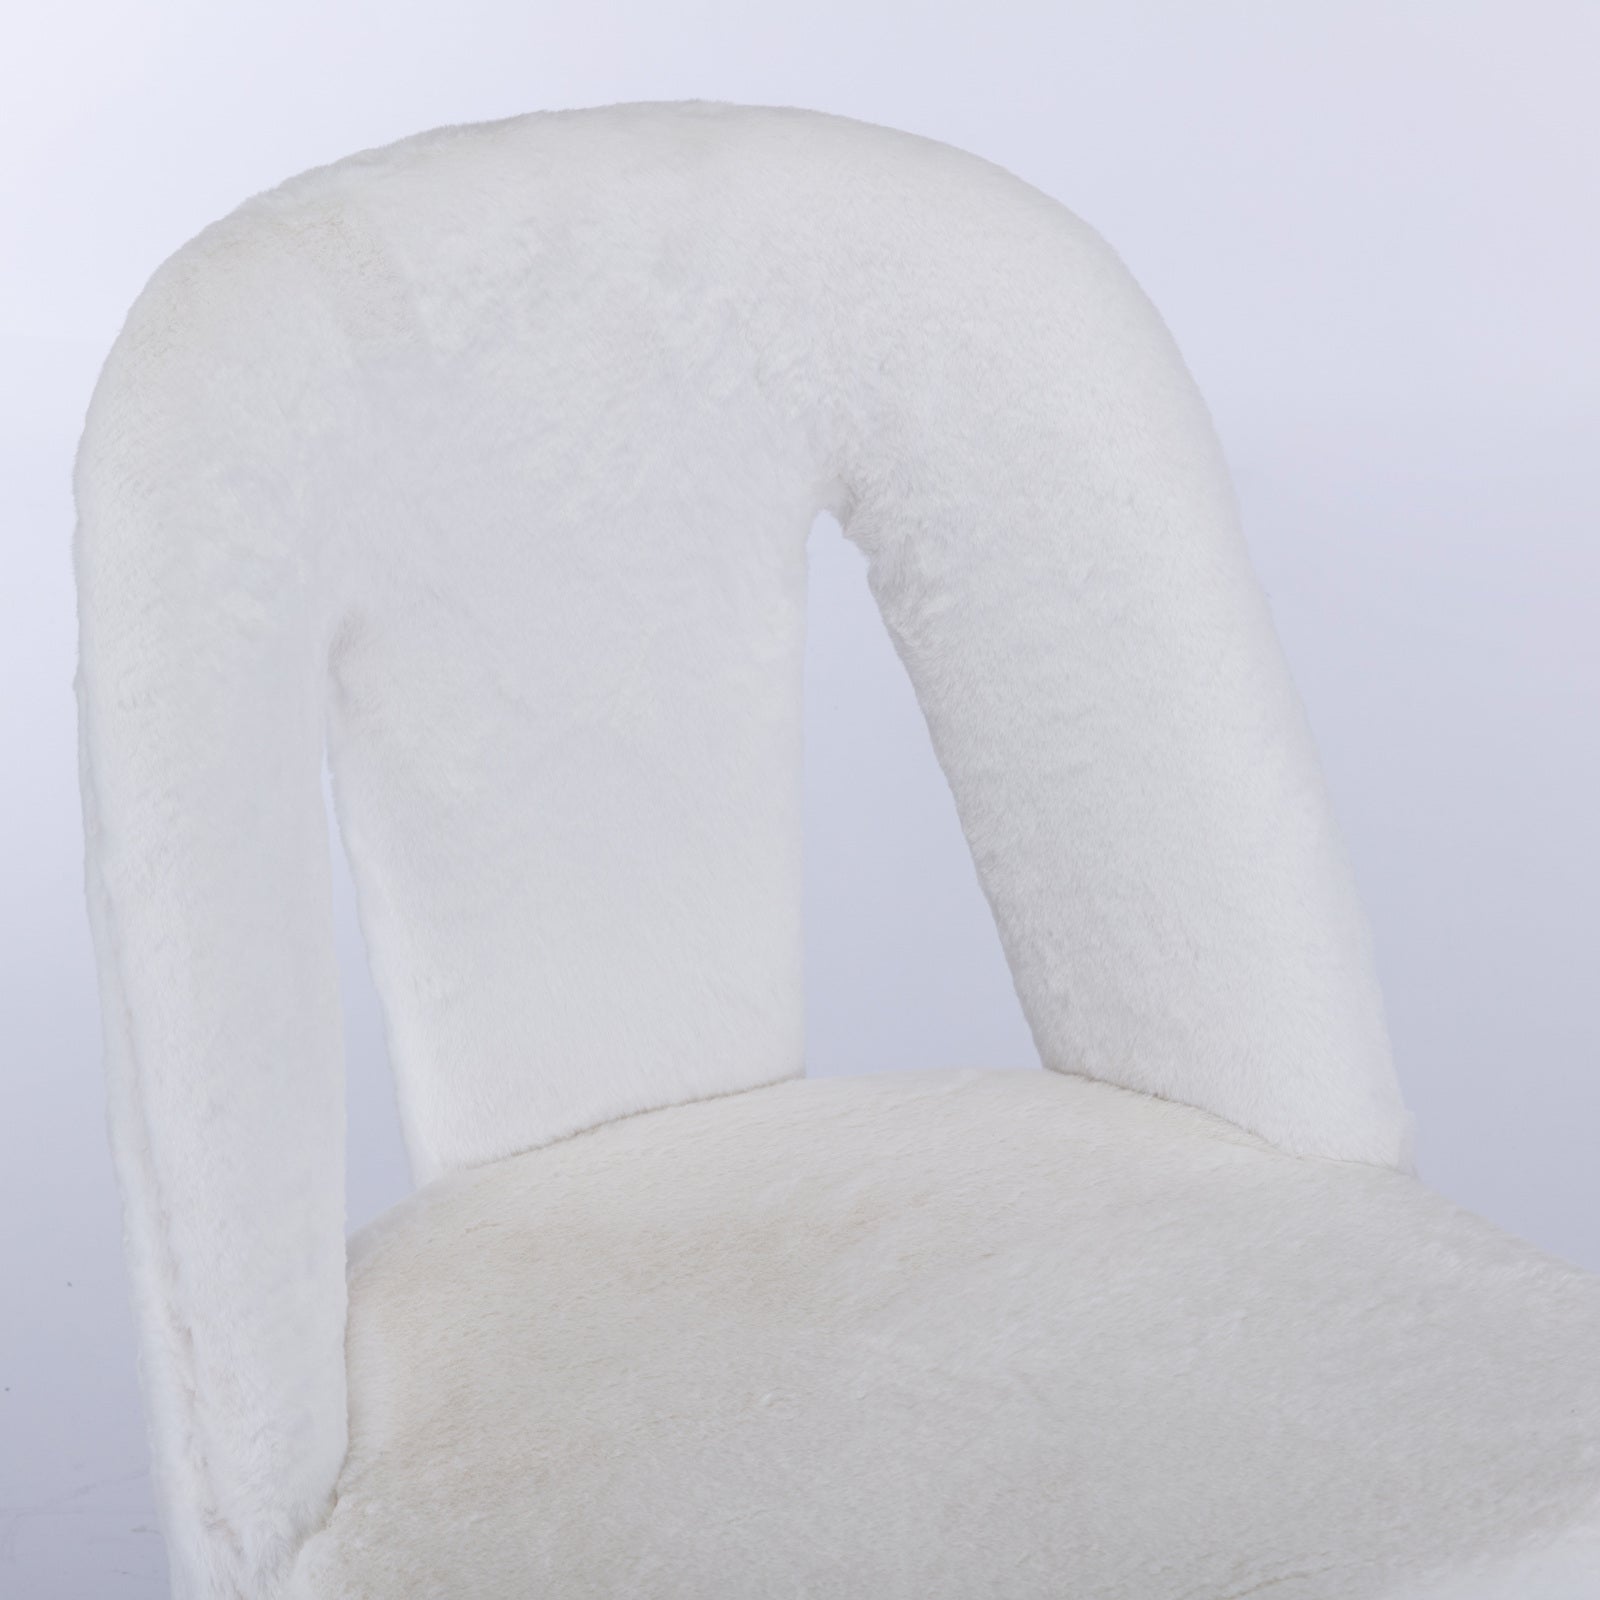 ZNTS A&A Furniture,Akoya Collection Modern | Contemporary Rabbit Fur Fibre Upholstered Dining Chair with W114391511